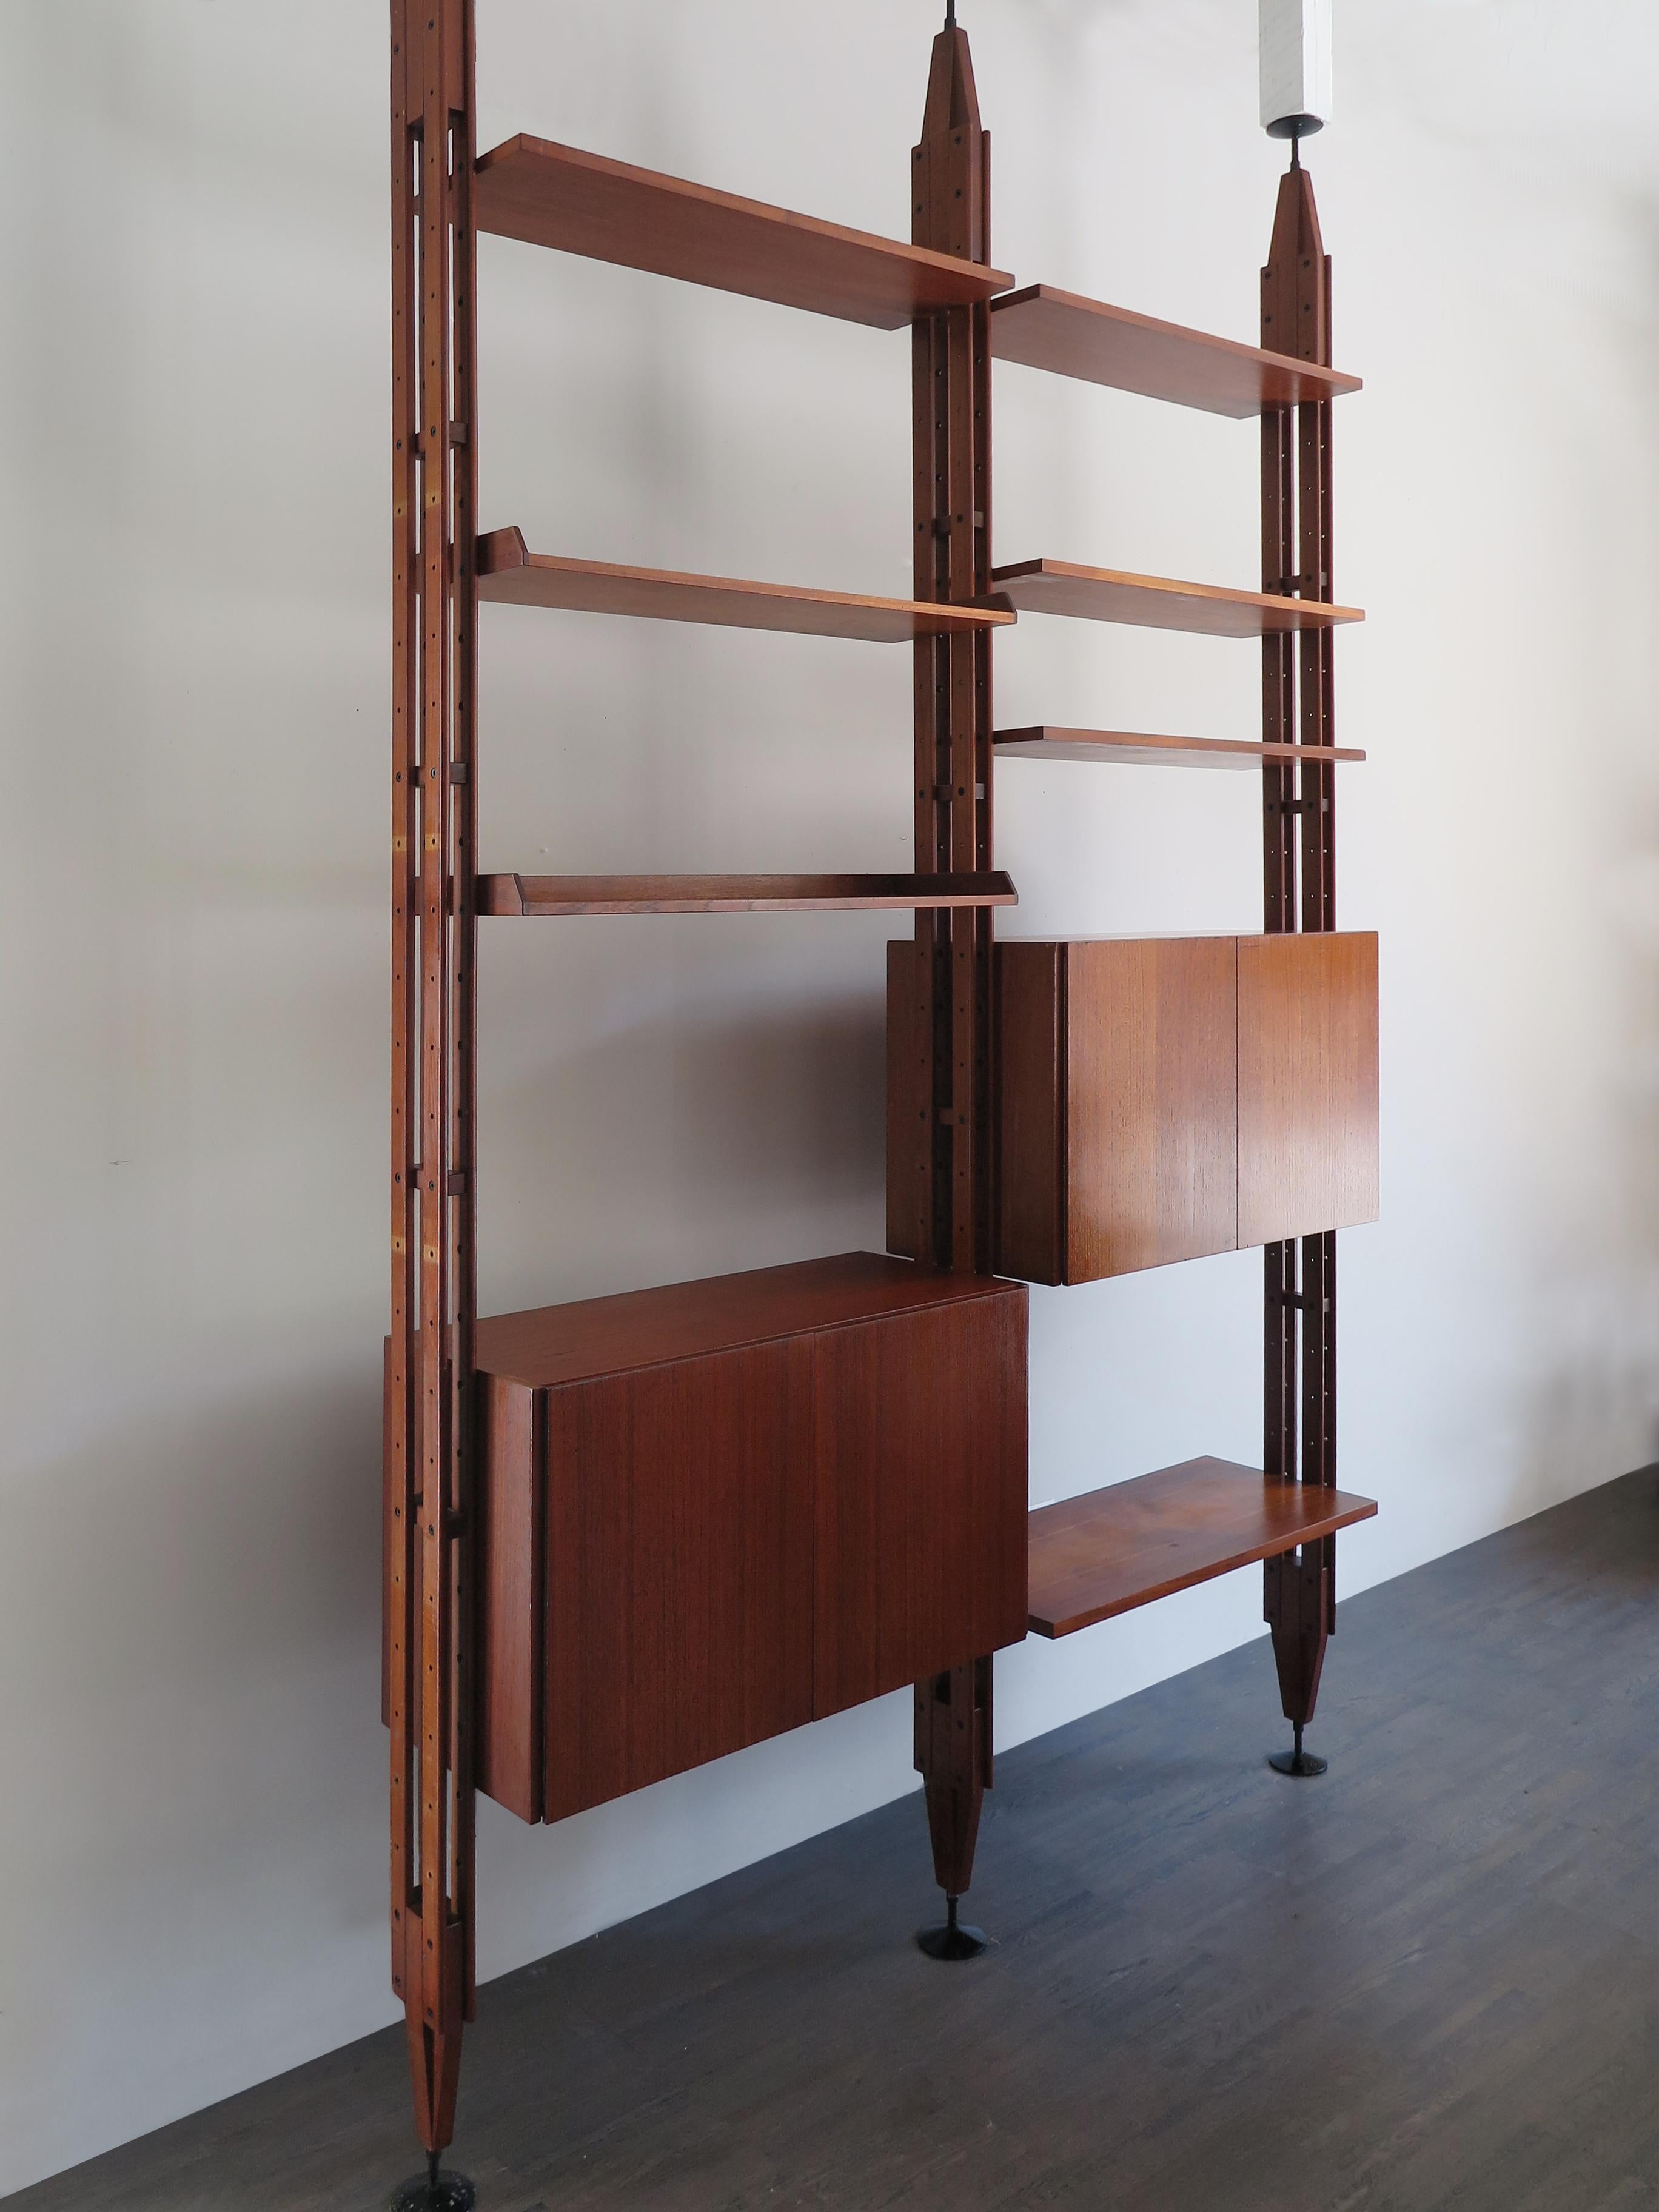 Italian very famous library shelves, adjustable with uprights set on the floor and ceiling, designed by Franco Albini in 1956 for Poggi Pavia, midcentury design.
Shelves and container adjustable in height.
Uprights, containers and shelves made of